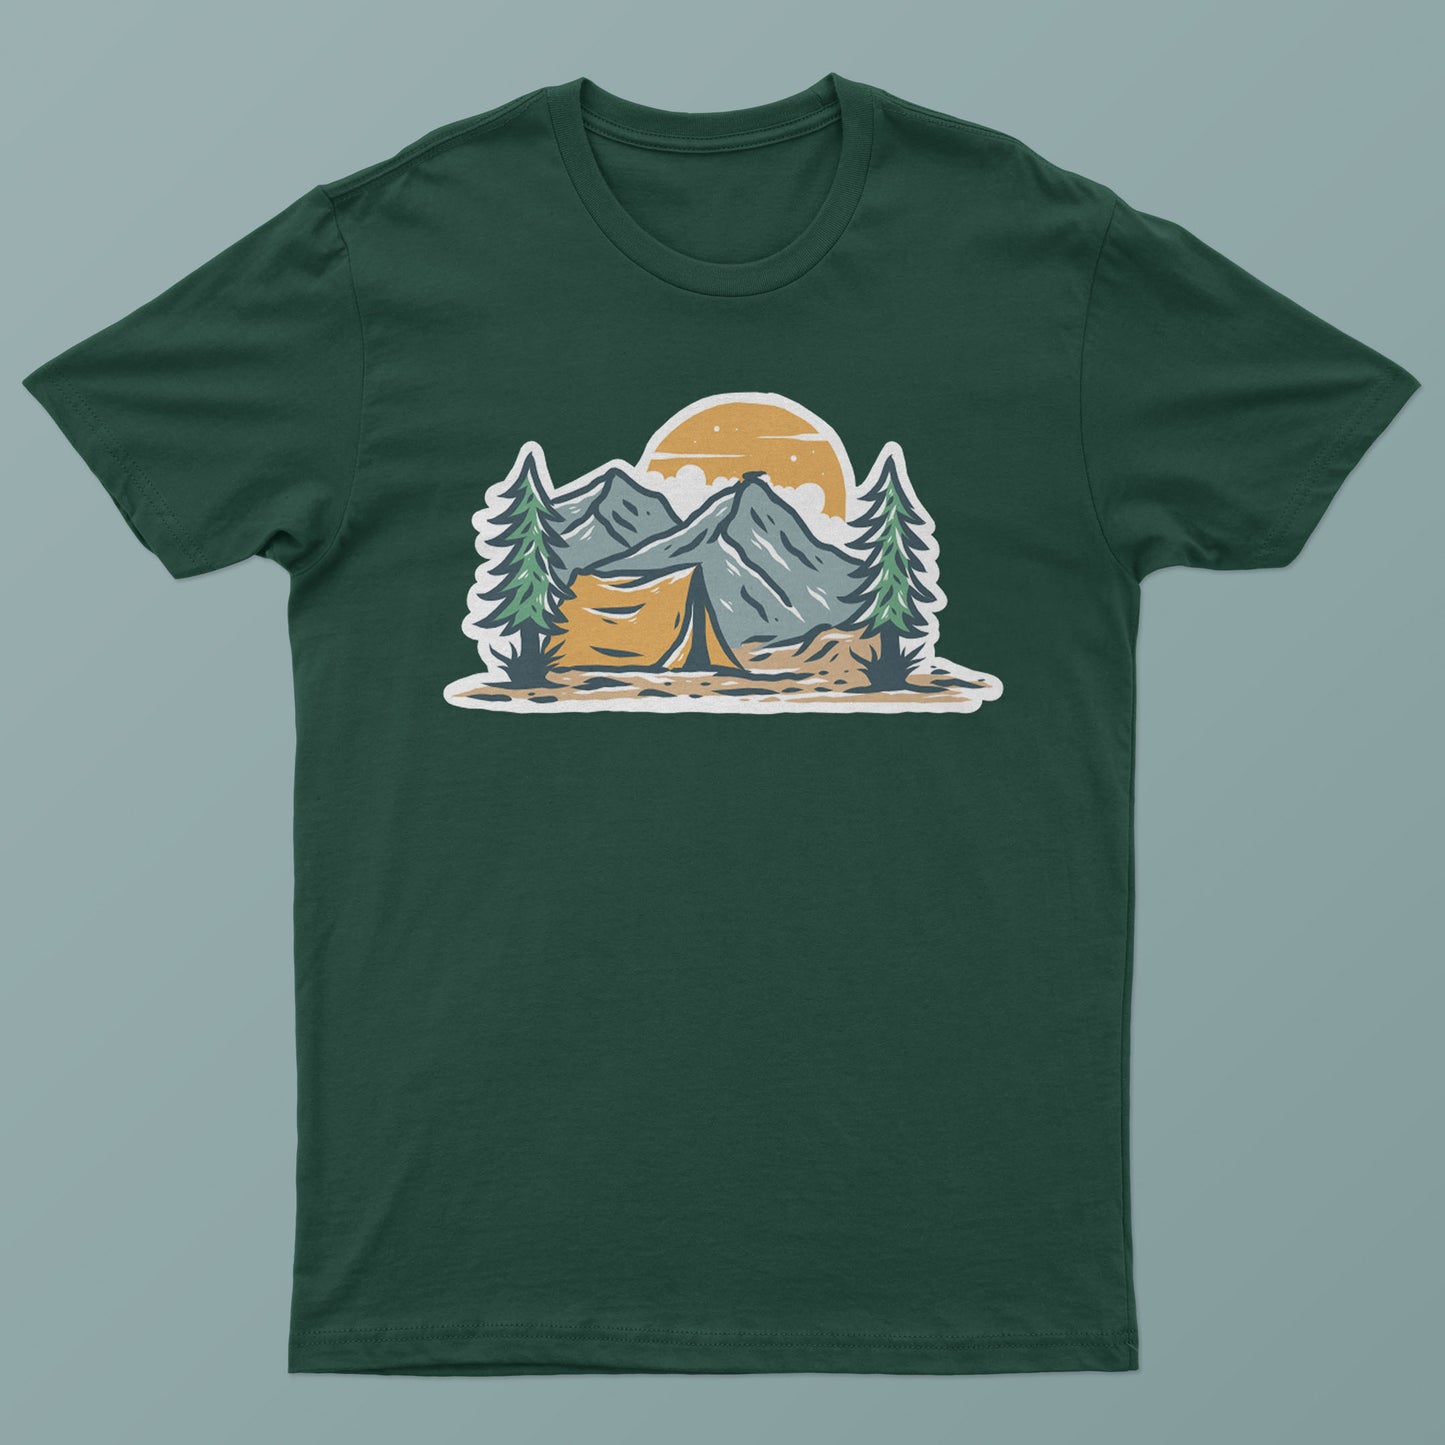 Vintage Camp Hiker Graphic Tee - S-XXXL, Various Colors, Free Shipping